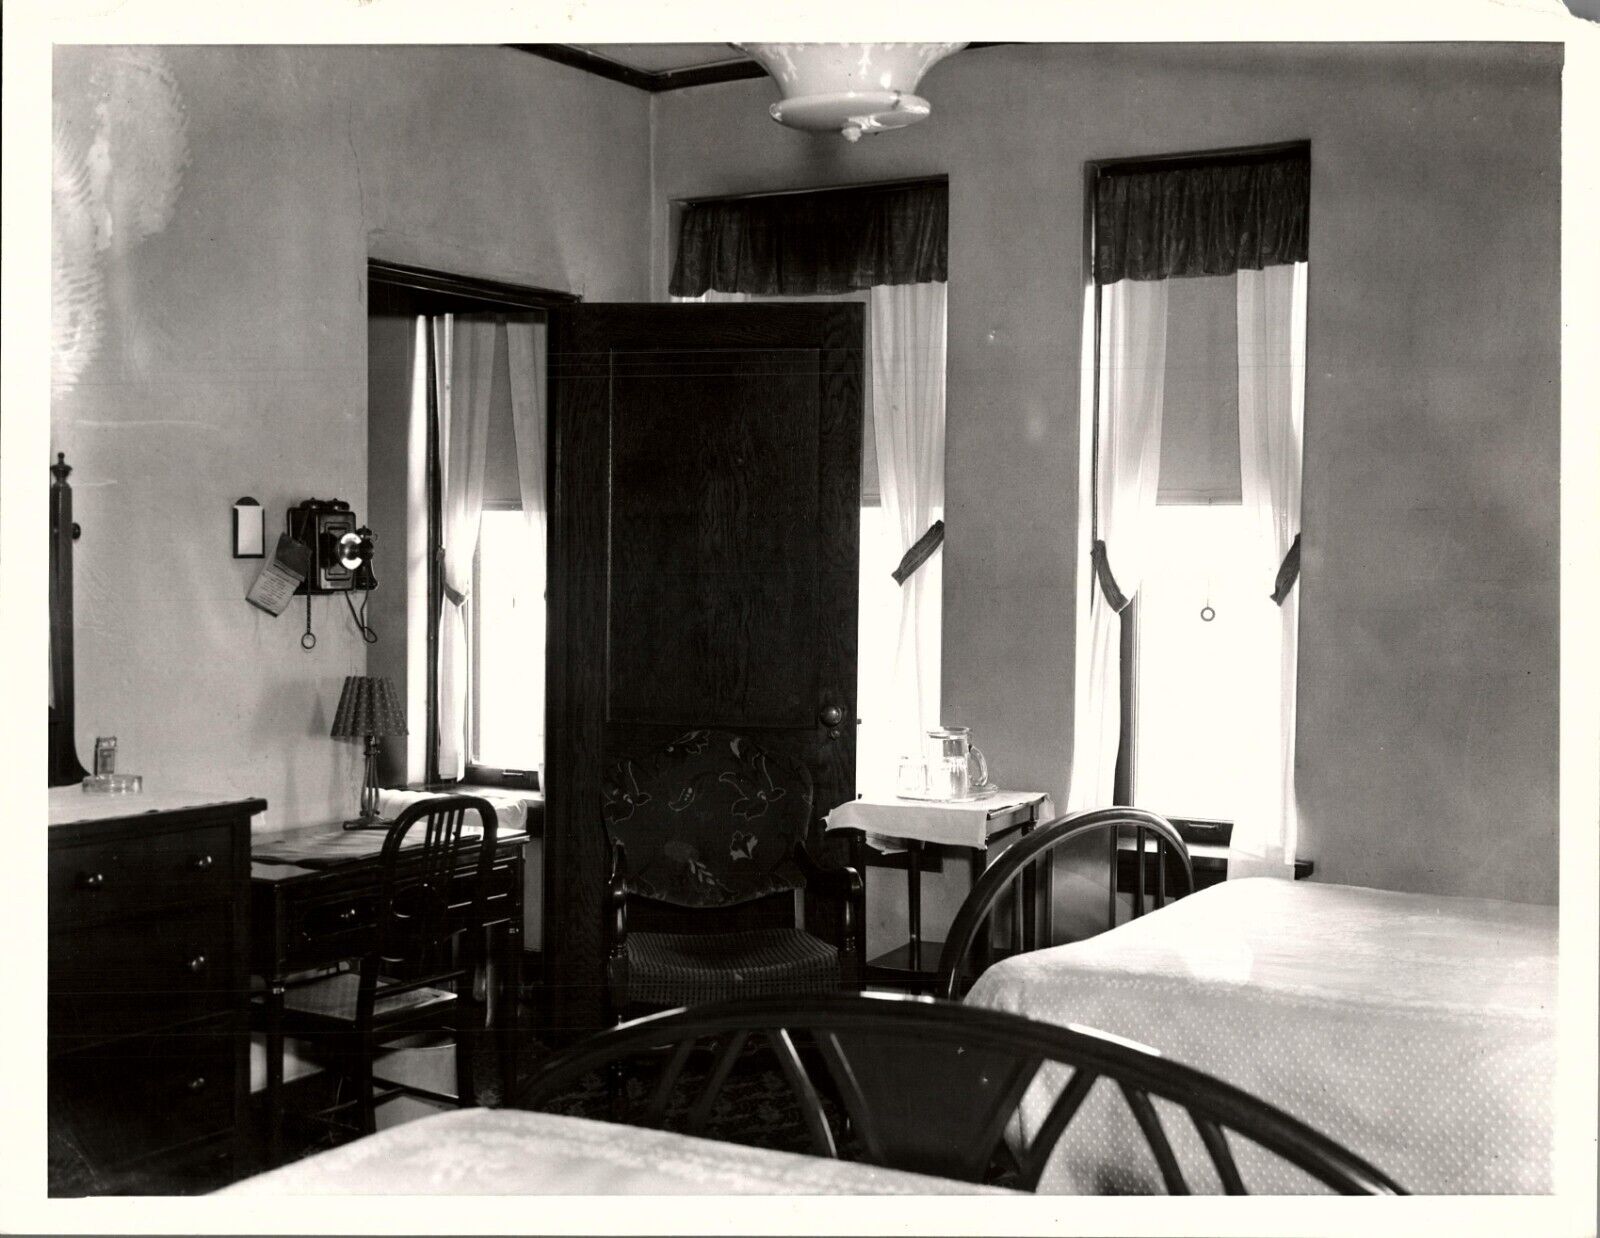 PRESS PHOTO - 1935 GUEST ROOM IN HOTEL ANTLERS, LORAIN, OH - REVERSE PRINT